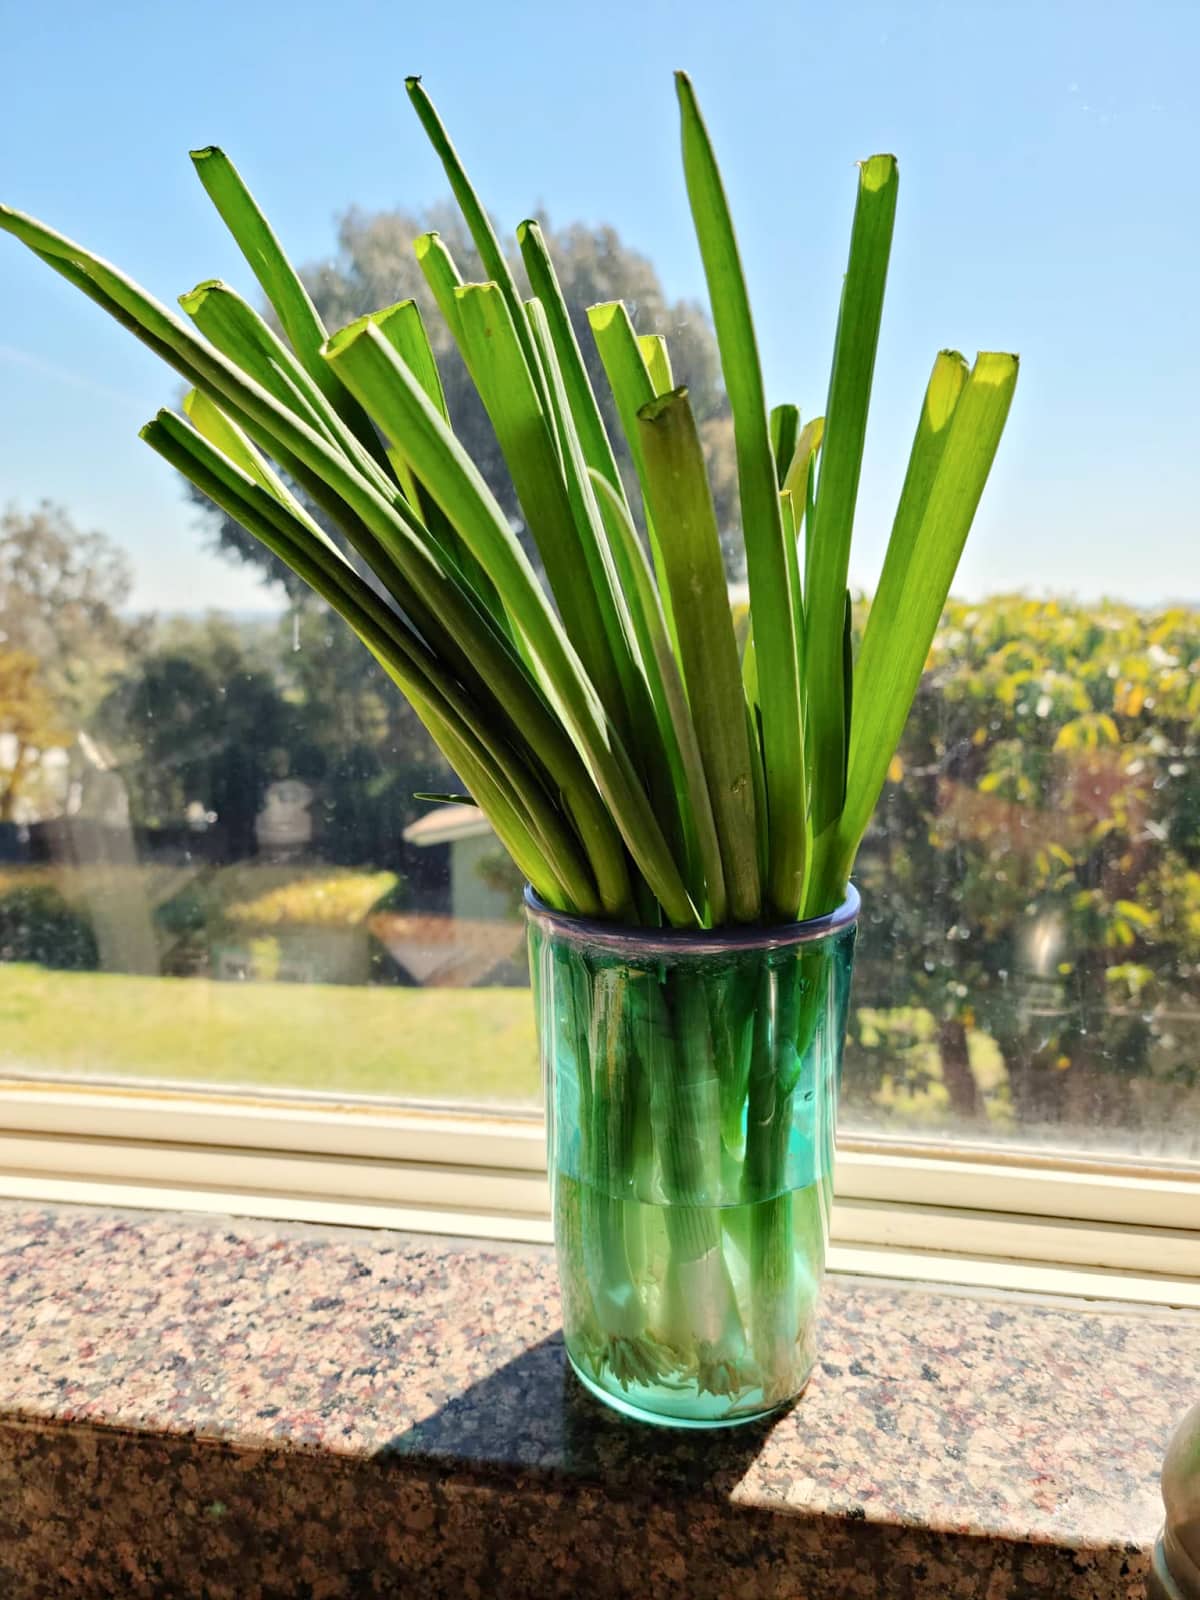 Green onion cuttings in a glass on the window sill 